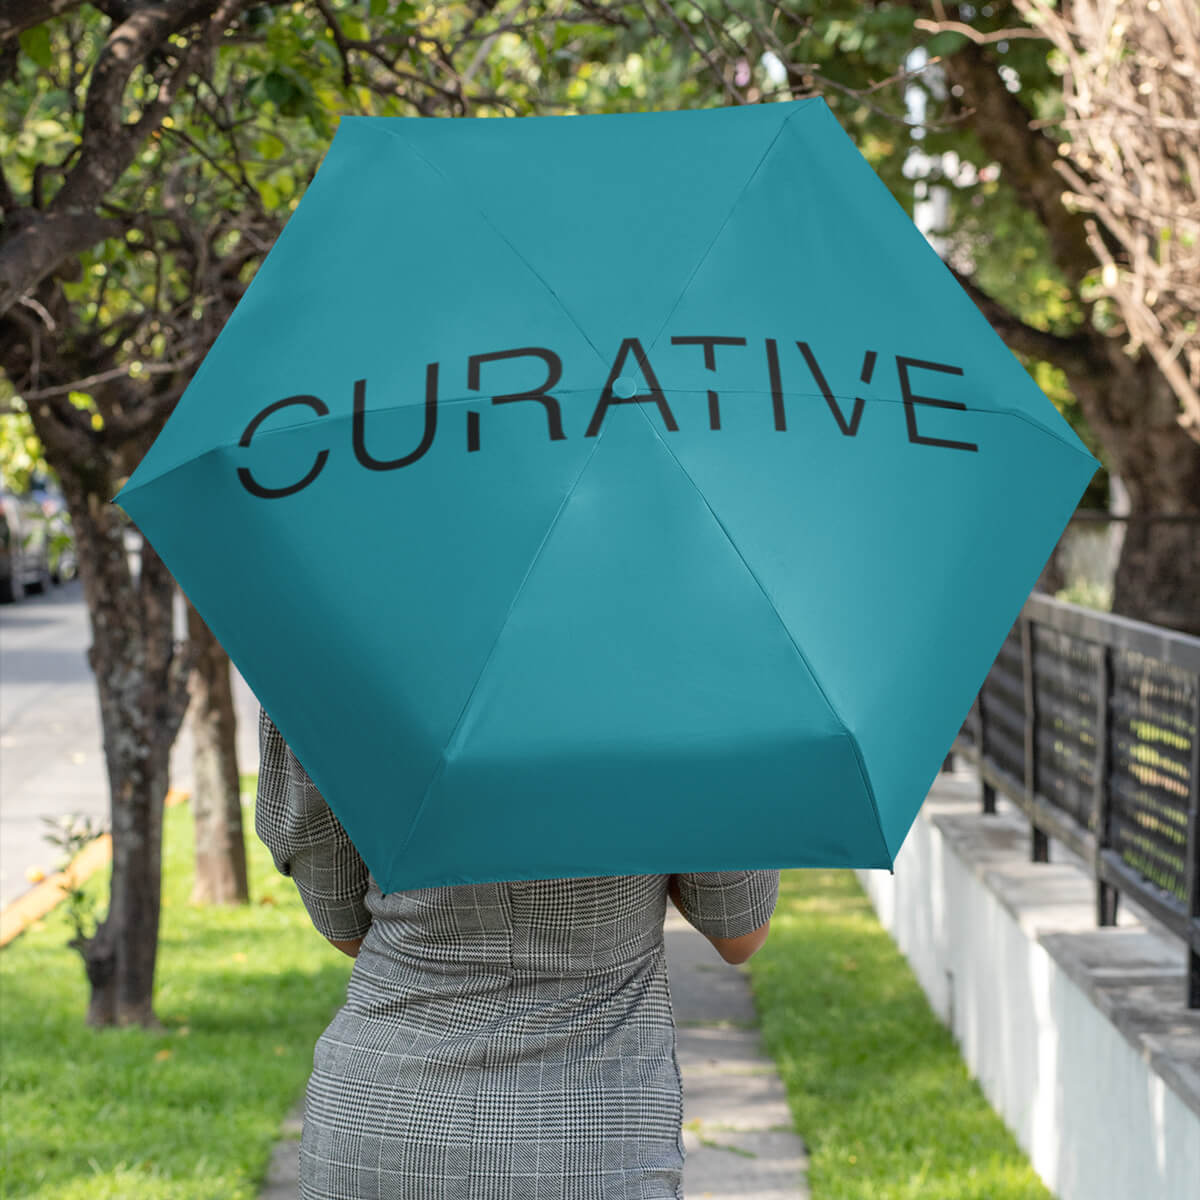 Woman walking away holding turquoise folding umbrella promotional umbrellas by curative printing